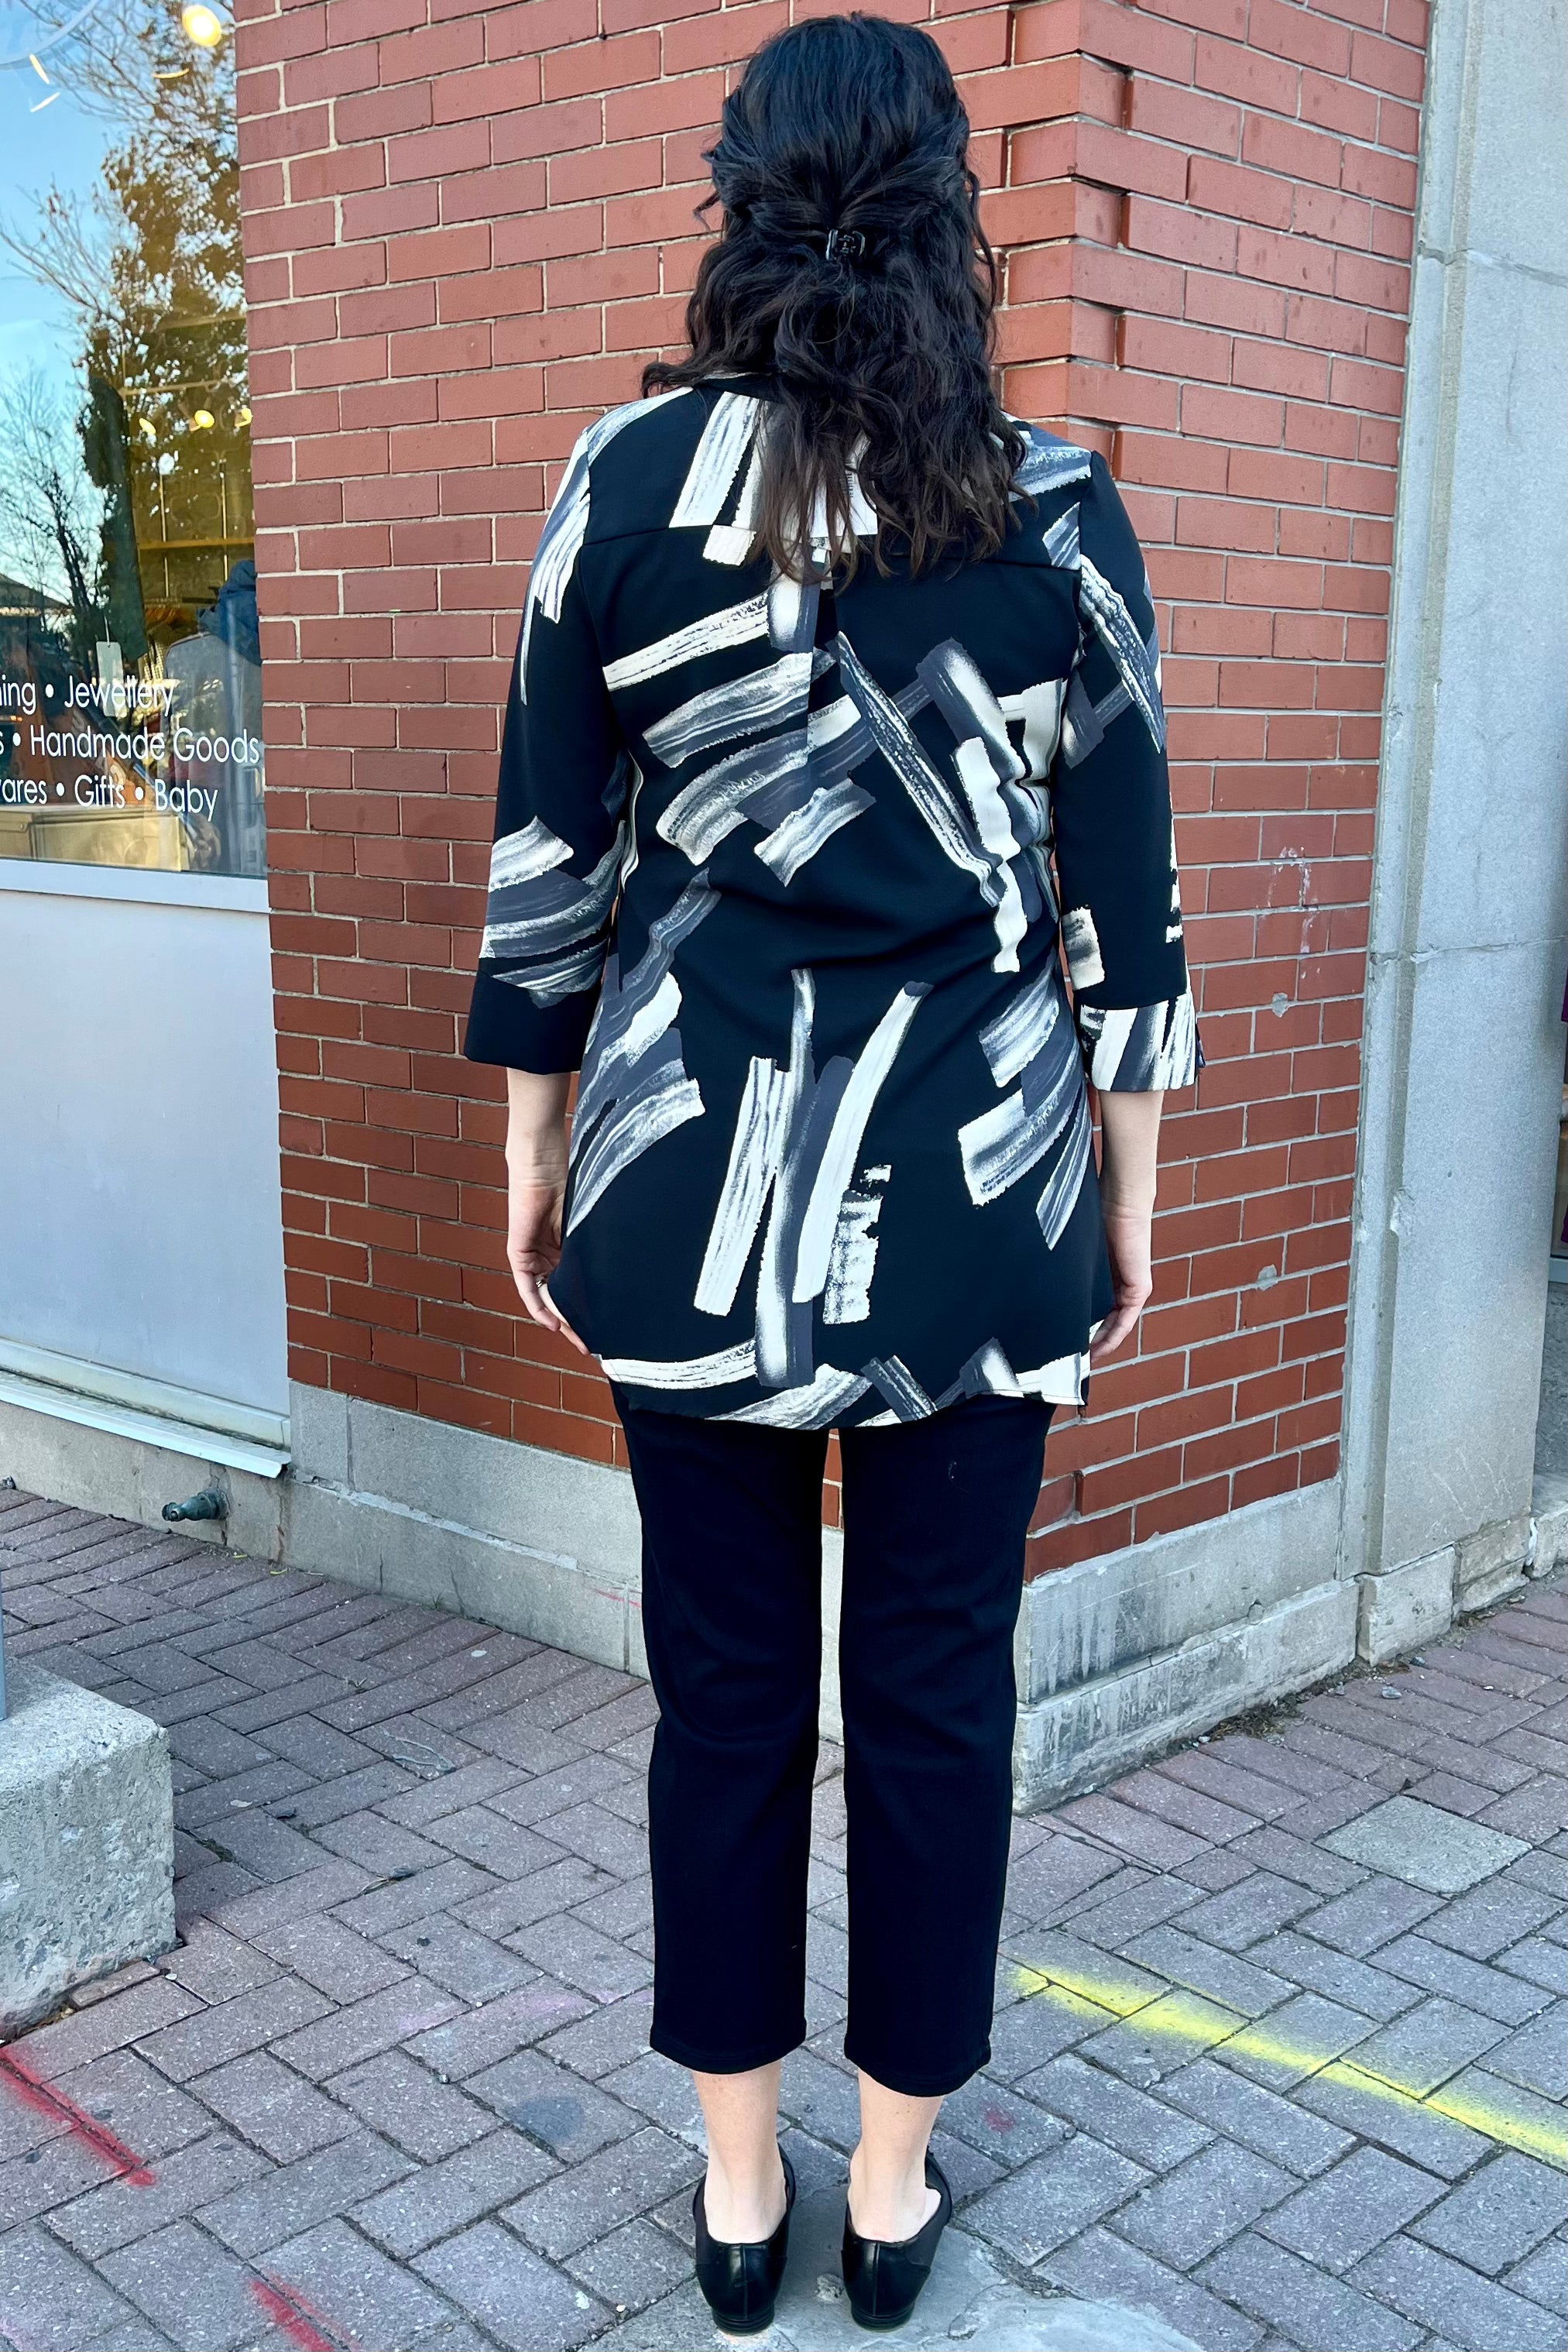 Norite Blouse by Compi K, B&W Brushstrokes, back view, V-neck, tunic length, button front, 3/4 sleeves, front patch pockets, sizes XS to XL, made in Canada